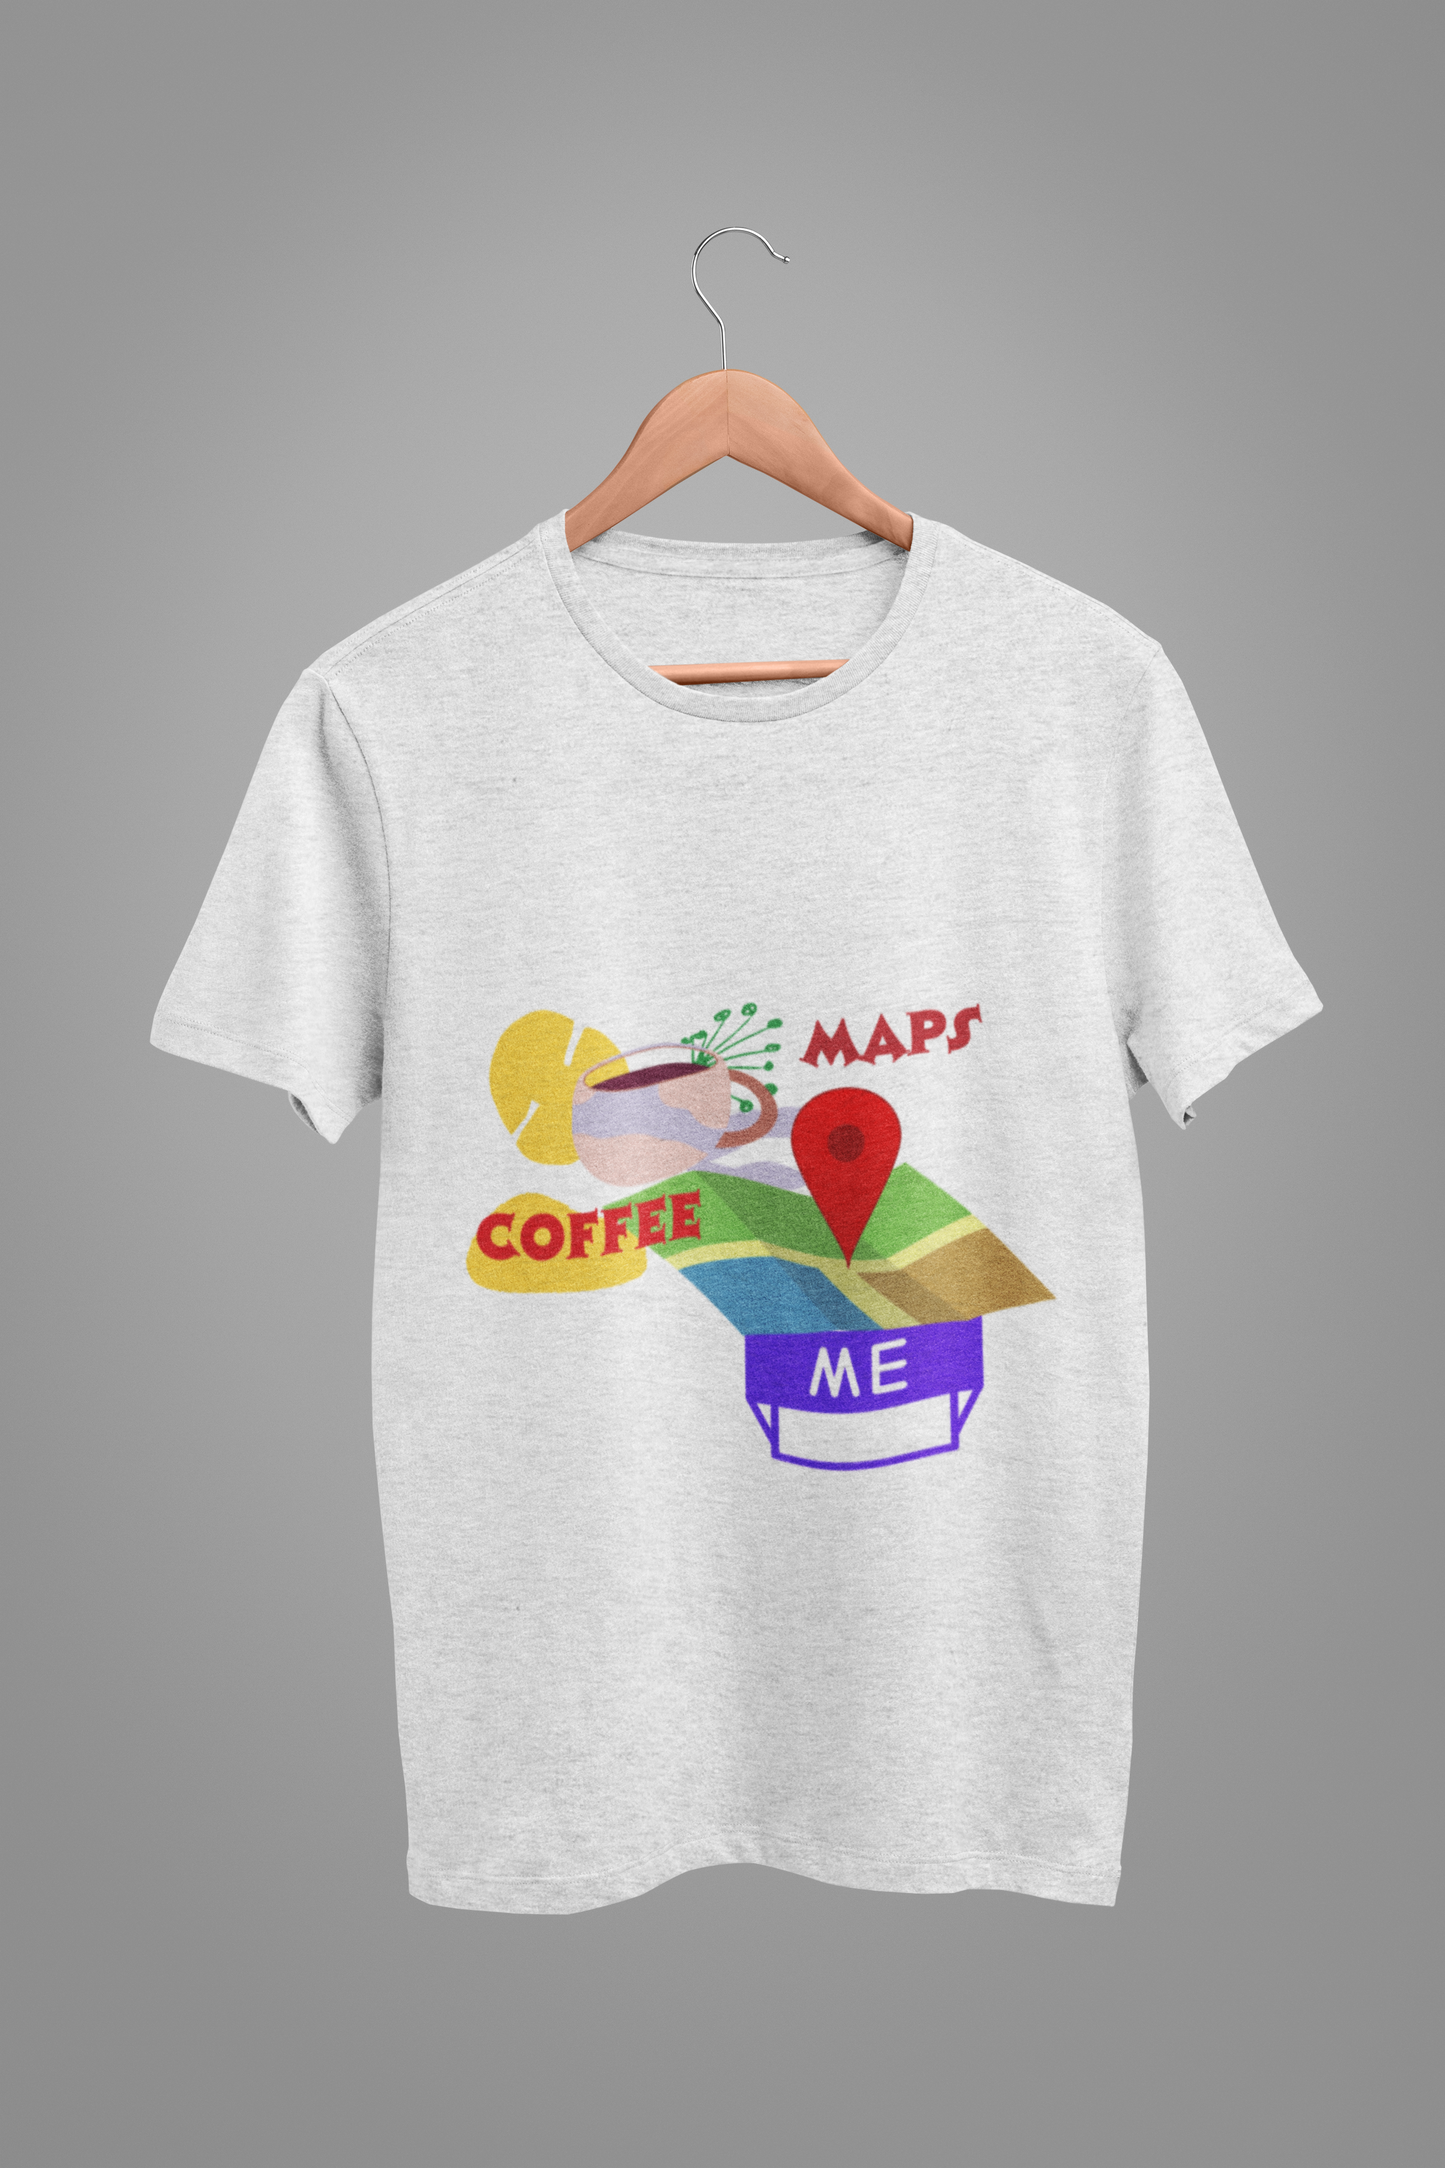 COFFEE WITH MAP T SHIRT